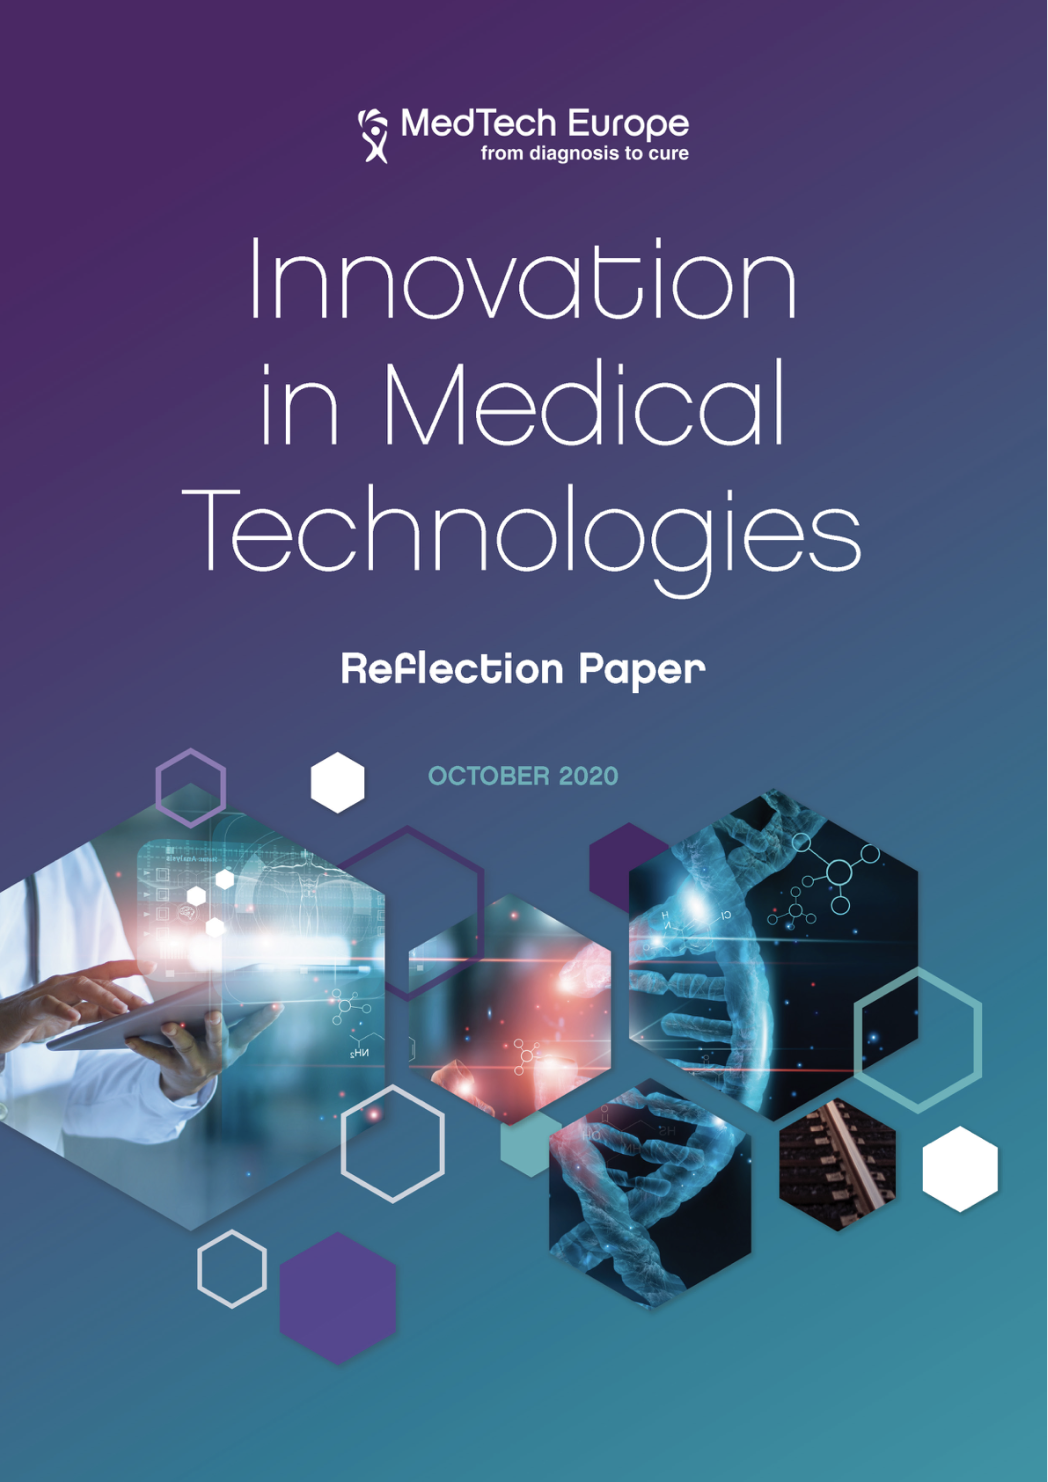 research paper about technology innovation